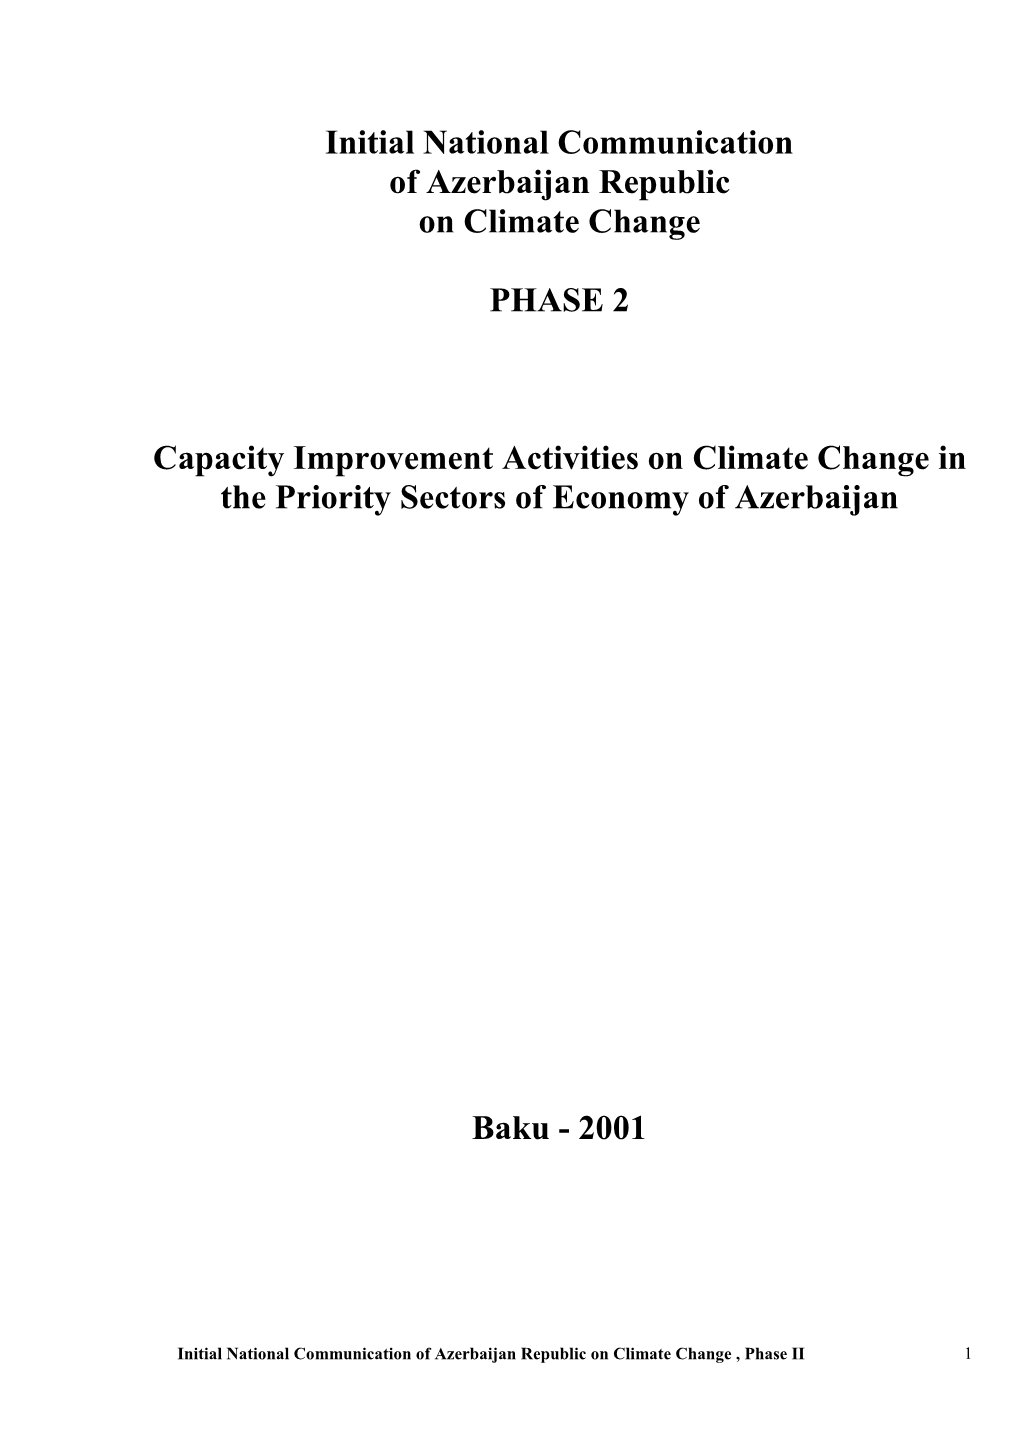 Initial National Communication of Azerbaijan Republic on Climate Change PHASE 2 Capacity Improvement Activities on Climate Chang